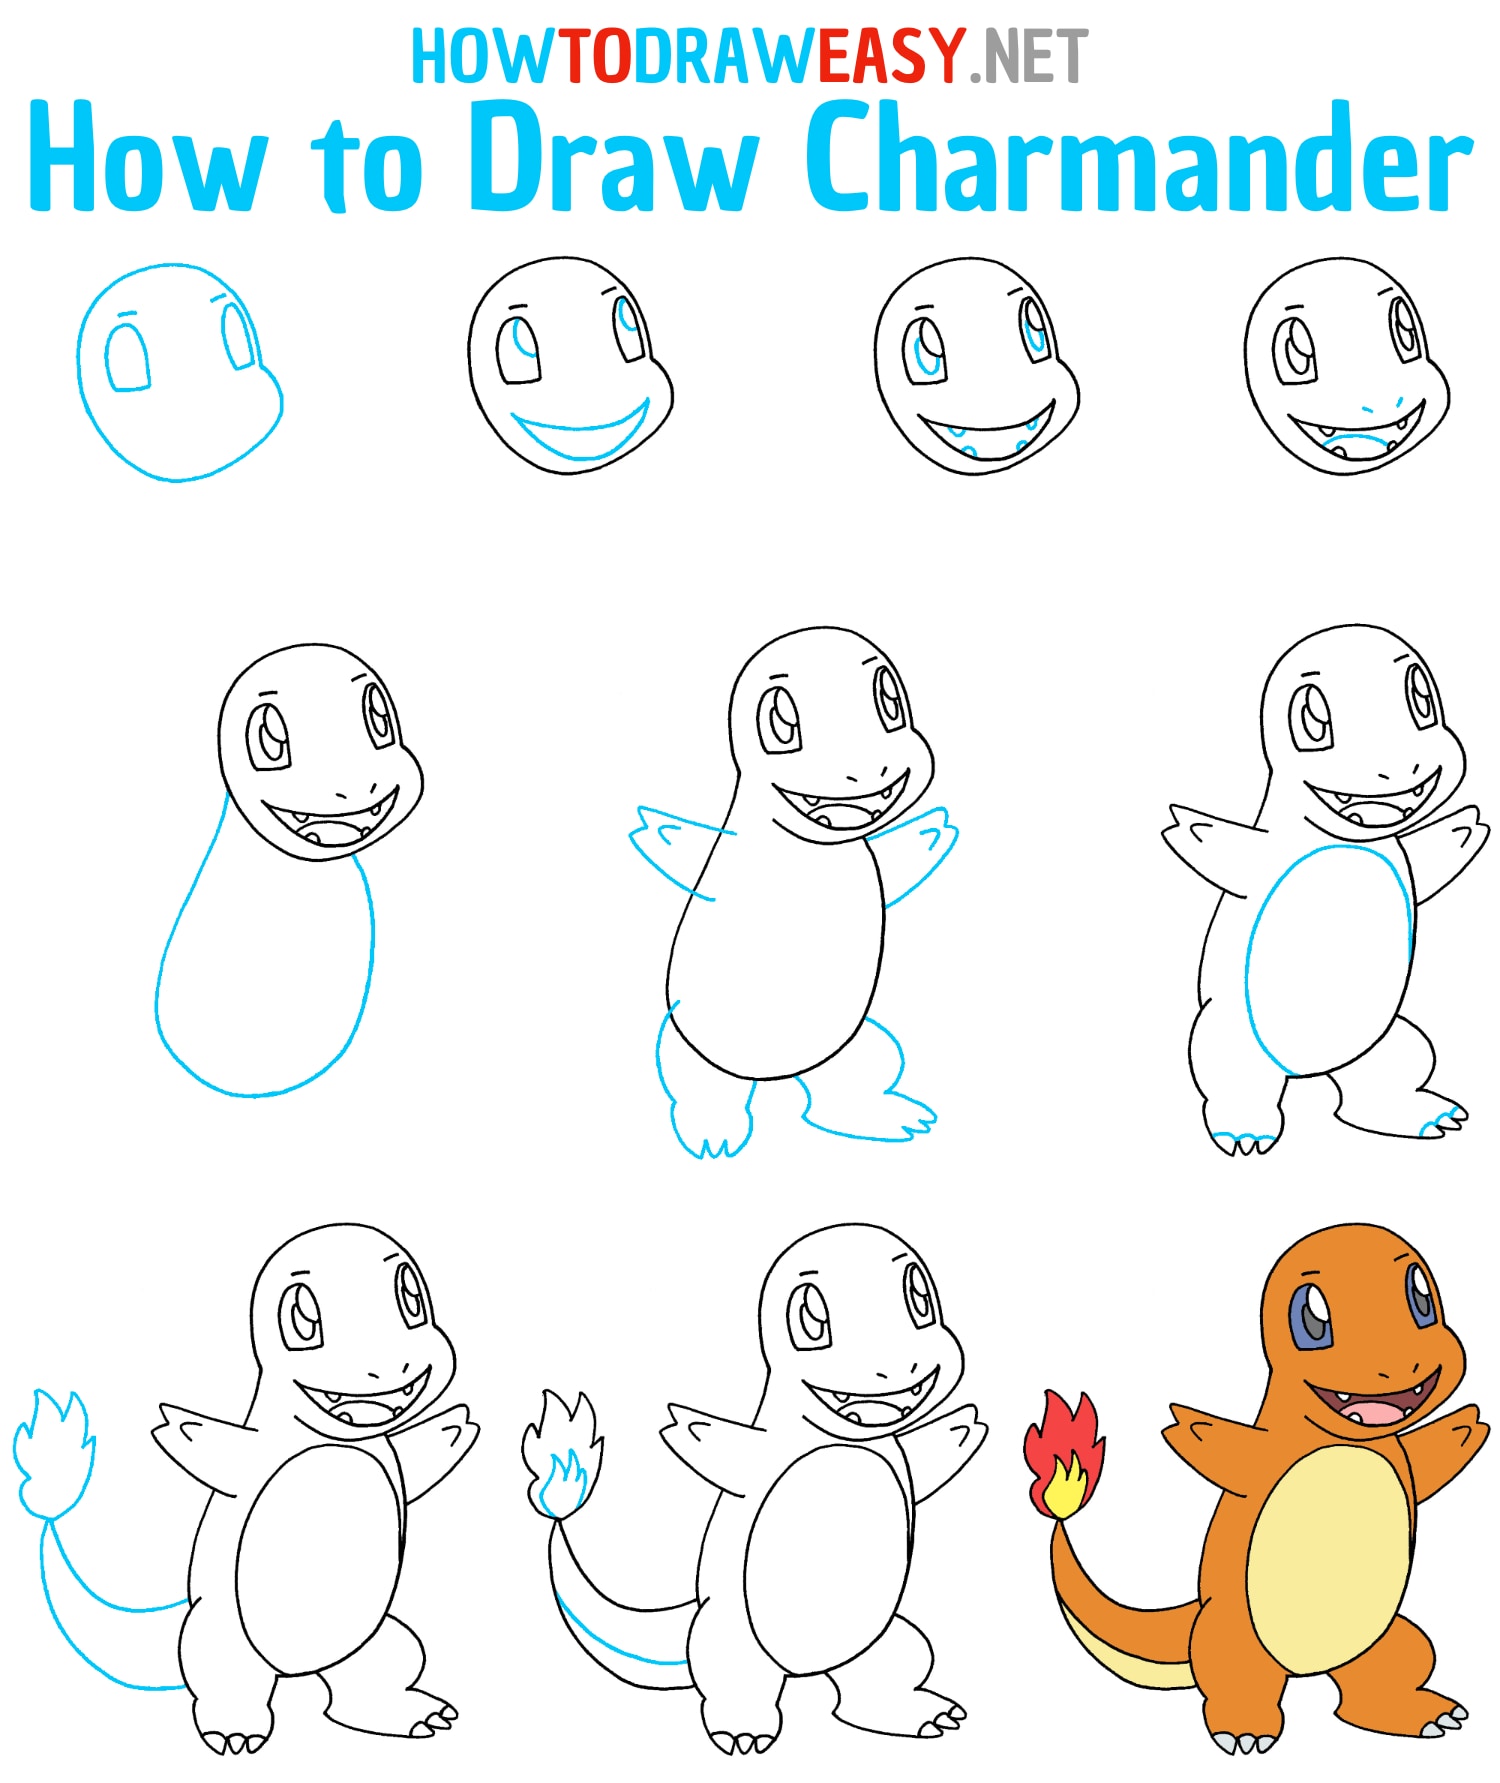 How to Draw Charmander Step by Step